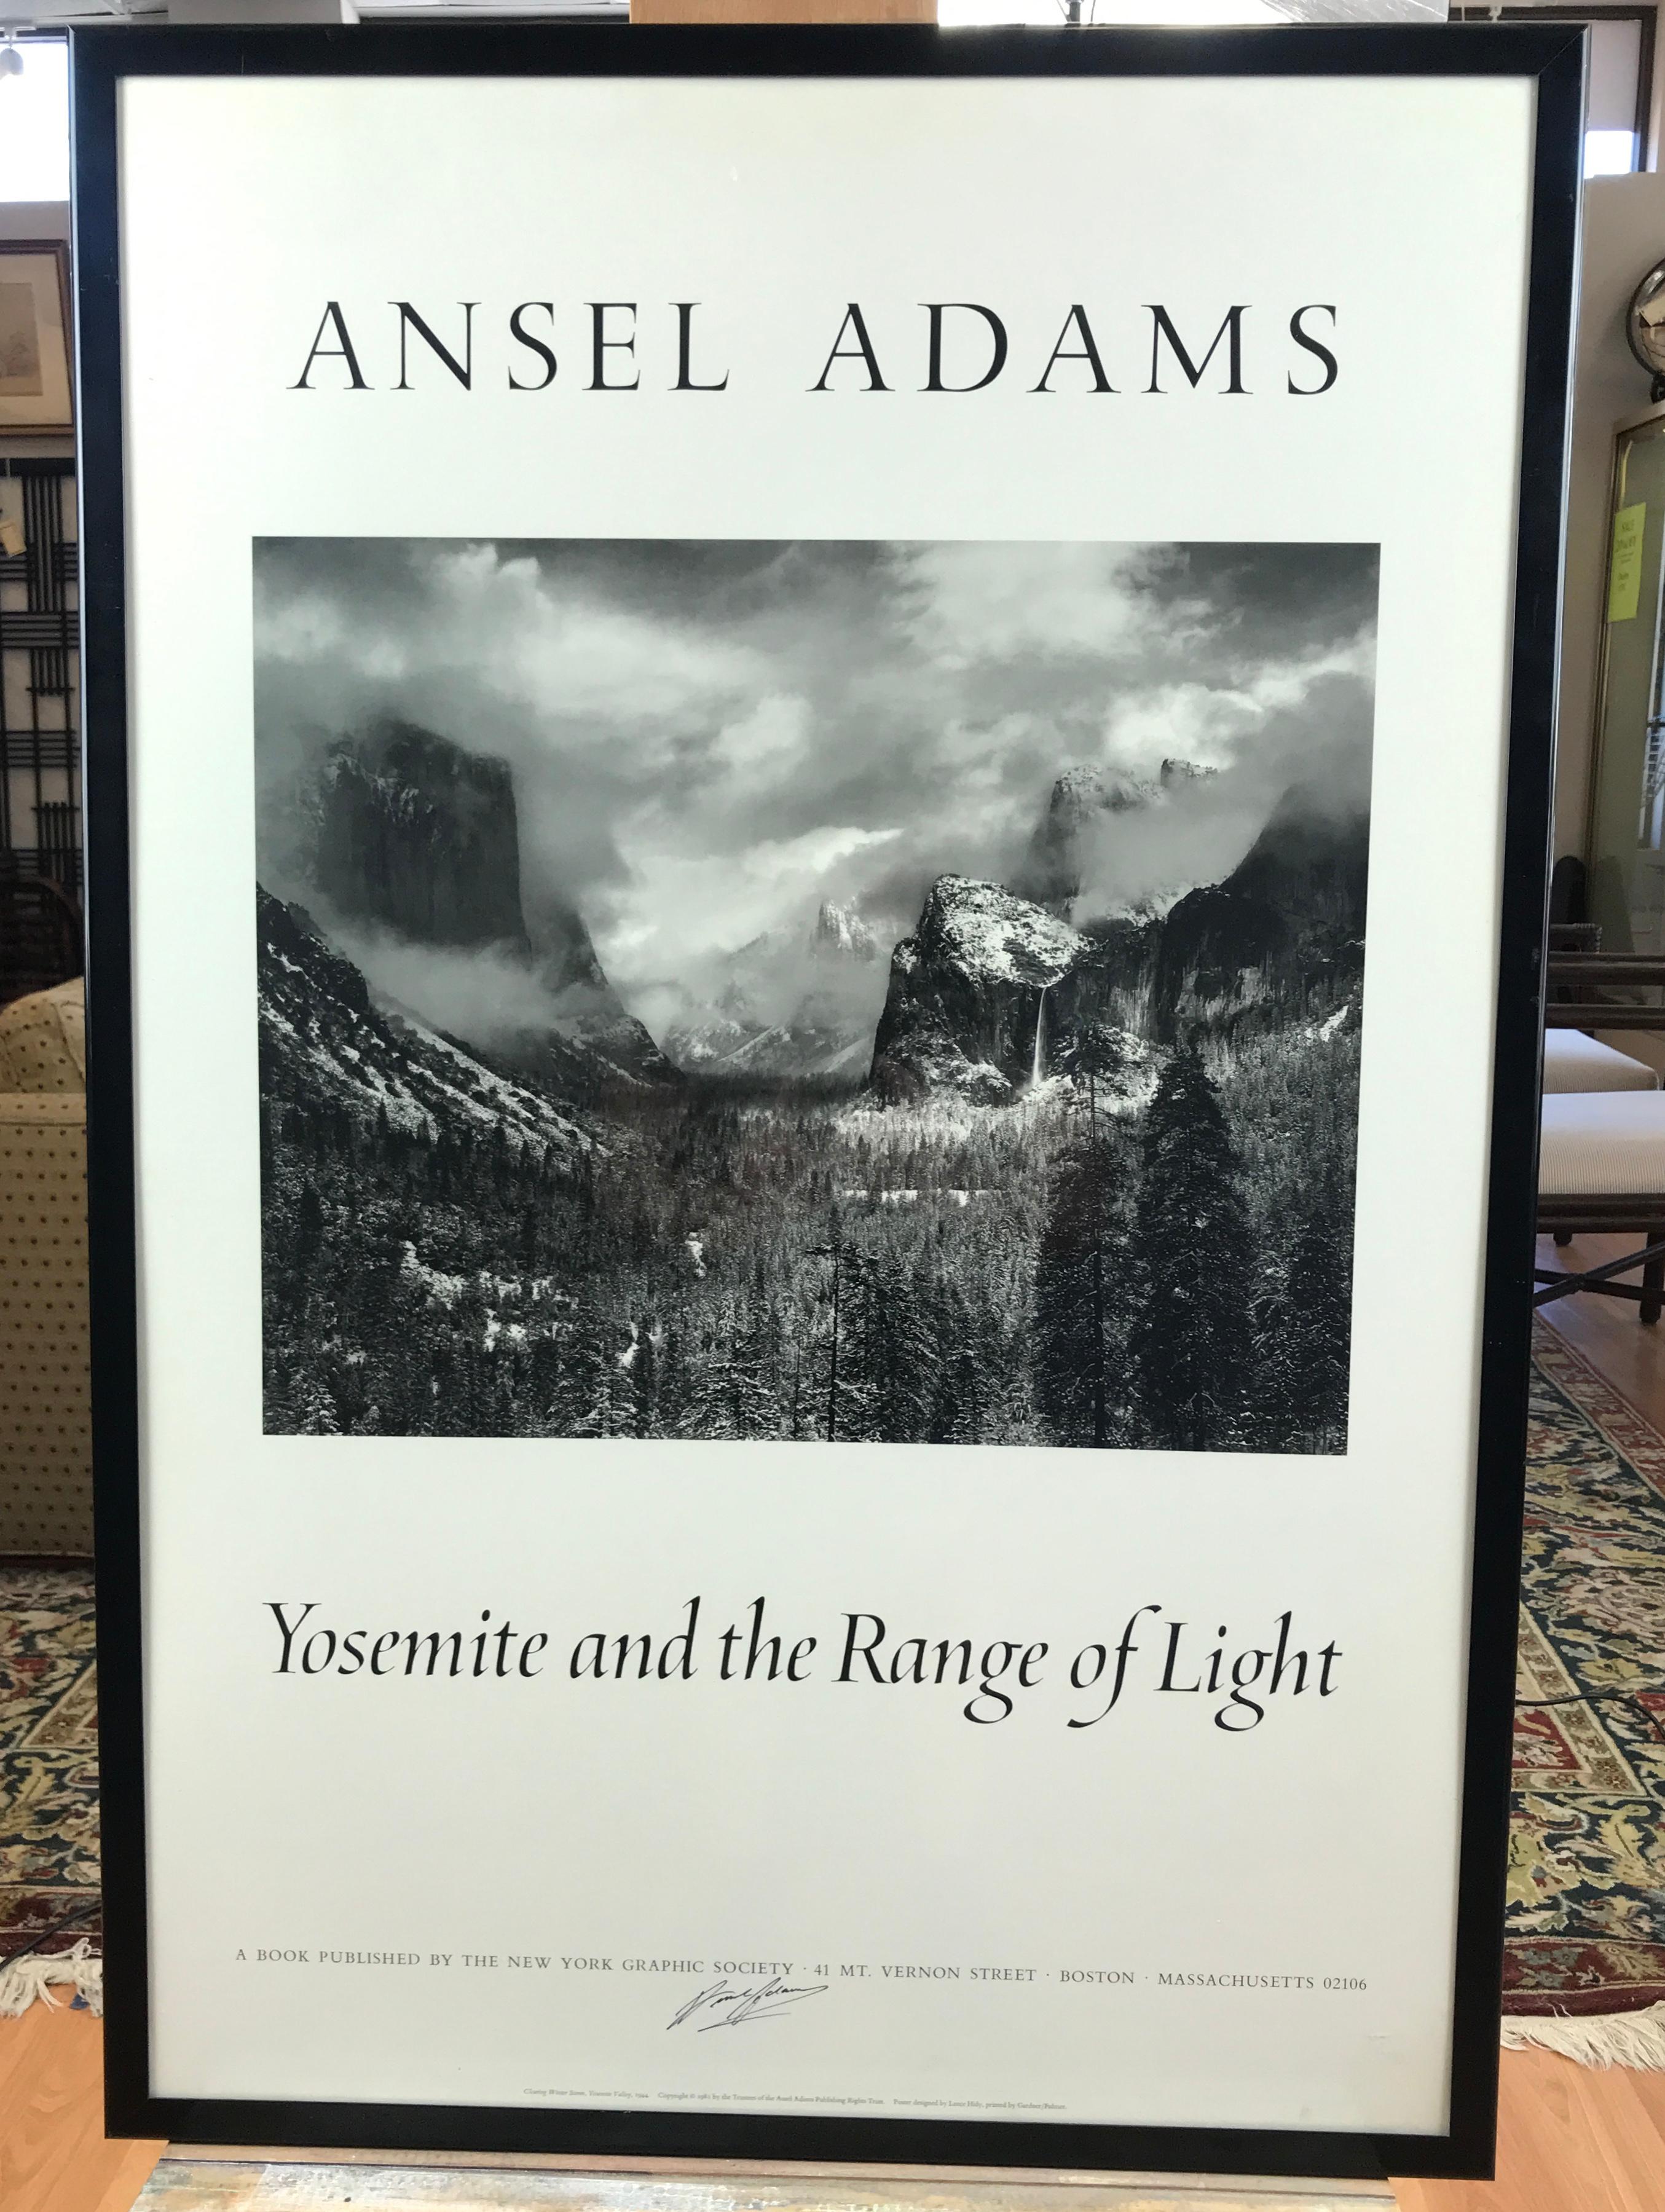 Offered is a Ansel Adams 